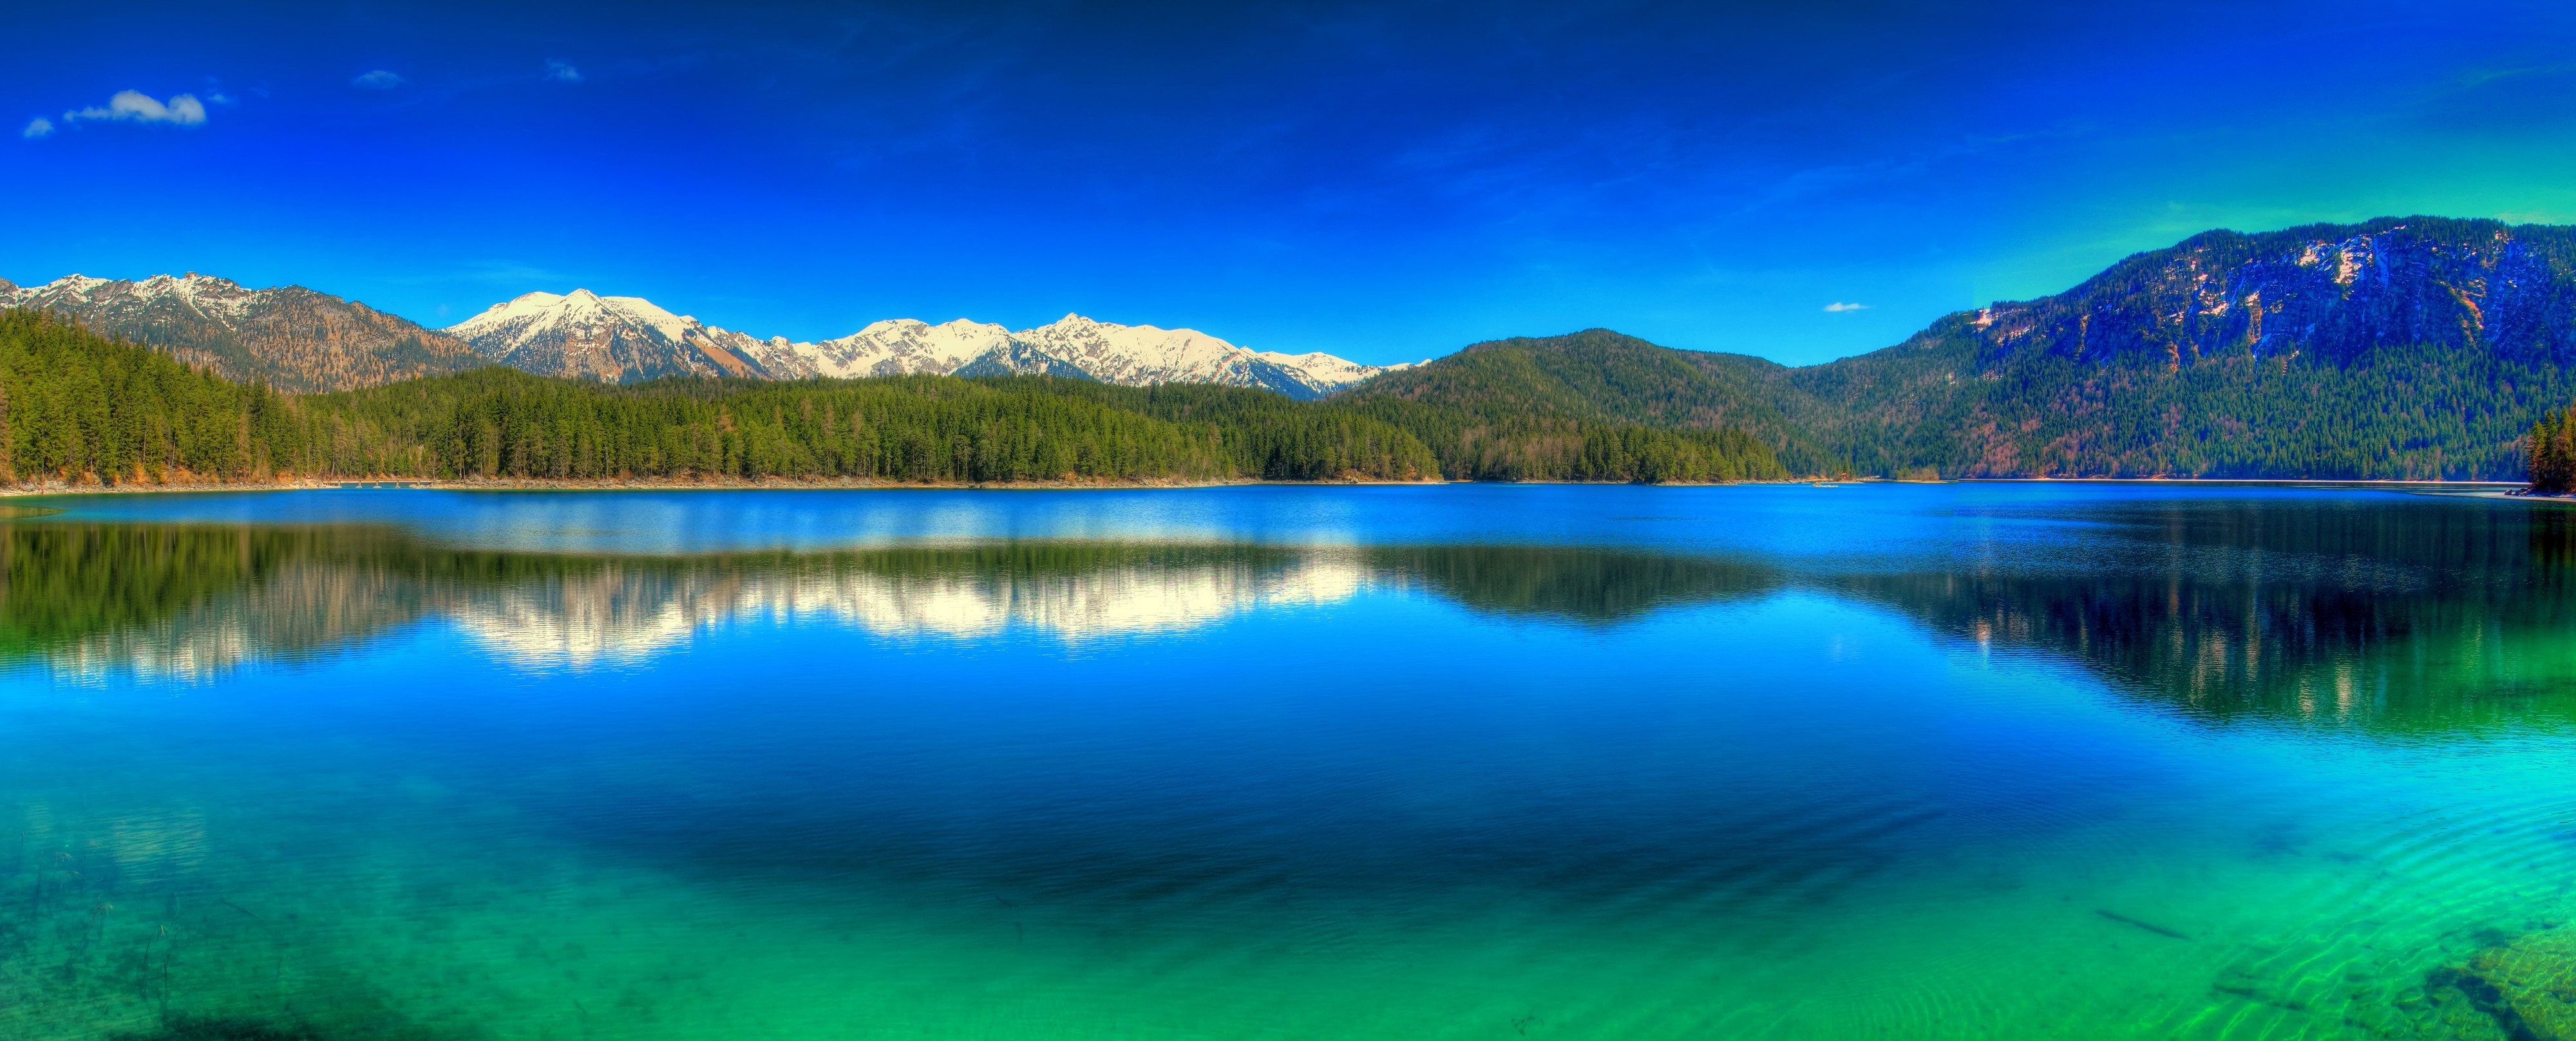 Beautiful natural scenery mountains water trees blue sky wallpaper